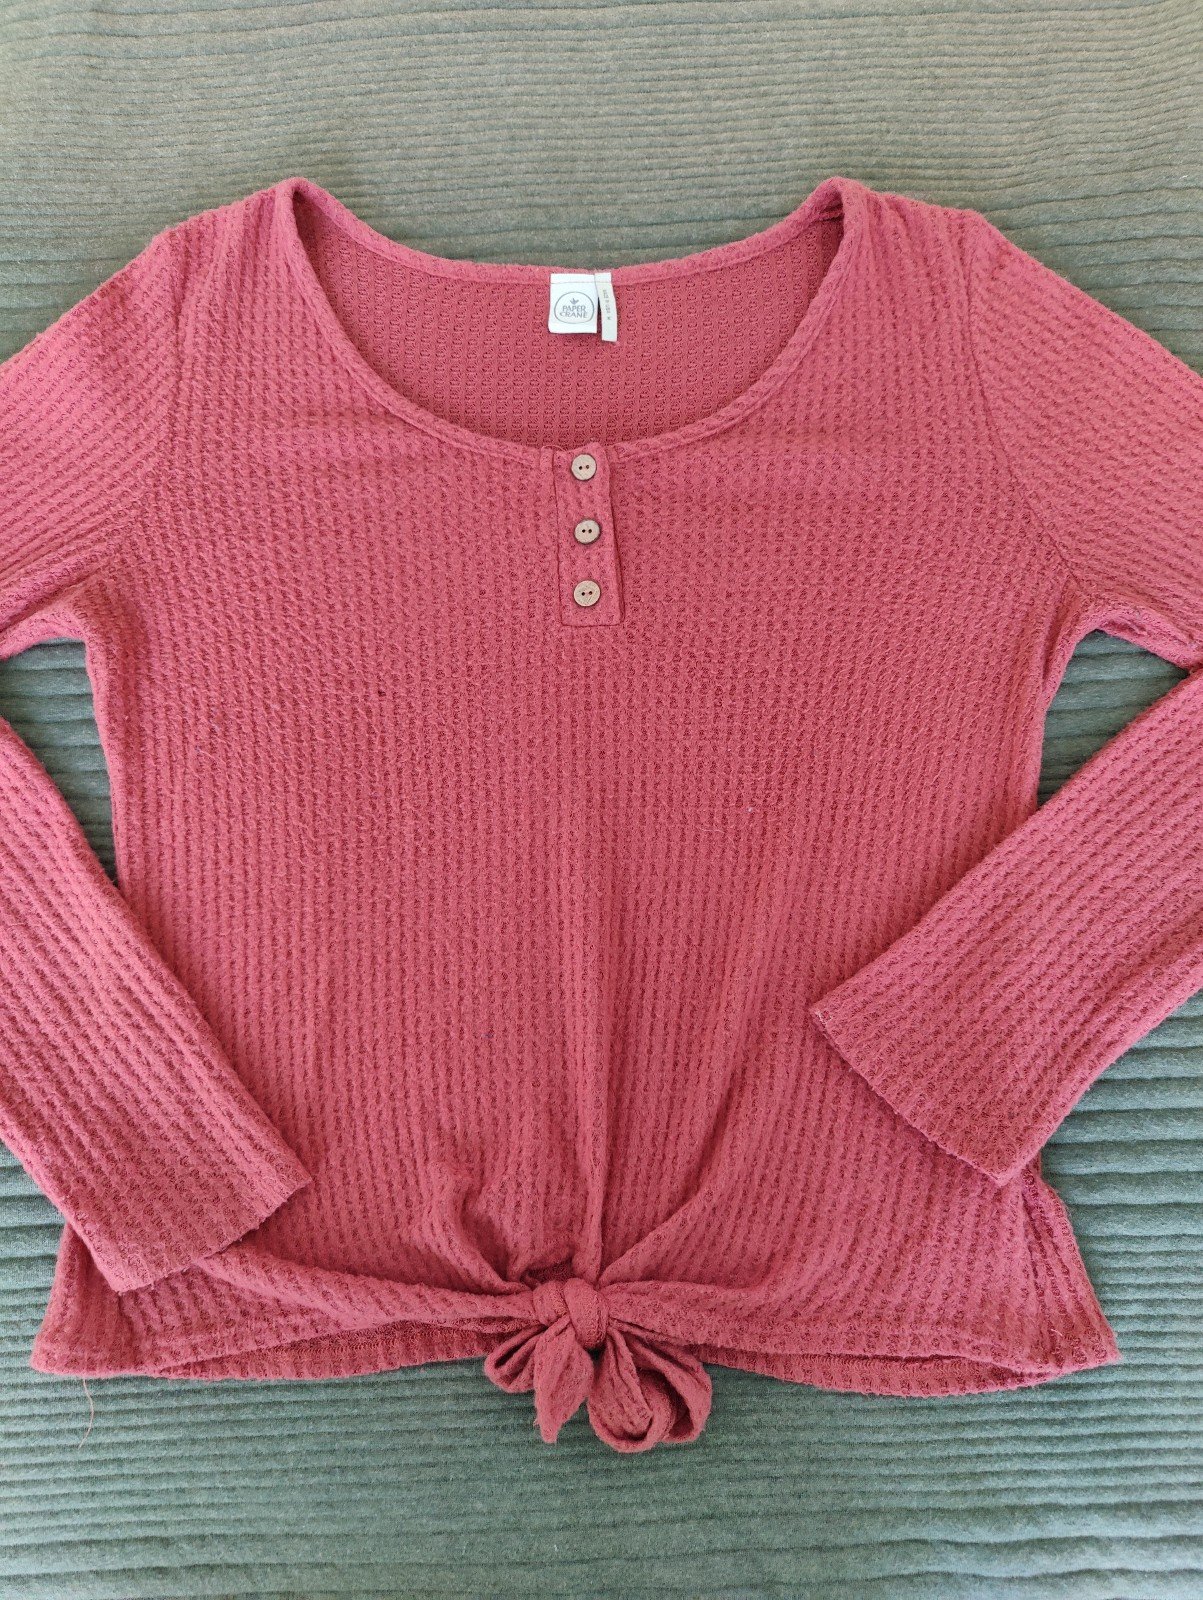 Wholesale price Paper Crane coral long sleeve top size 